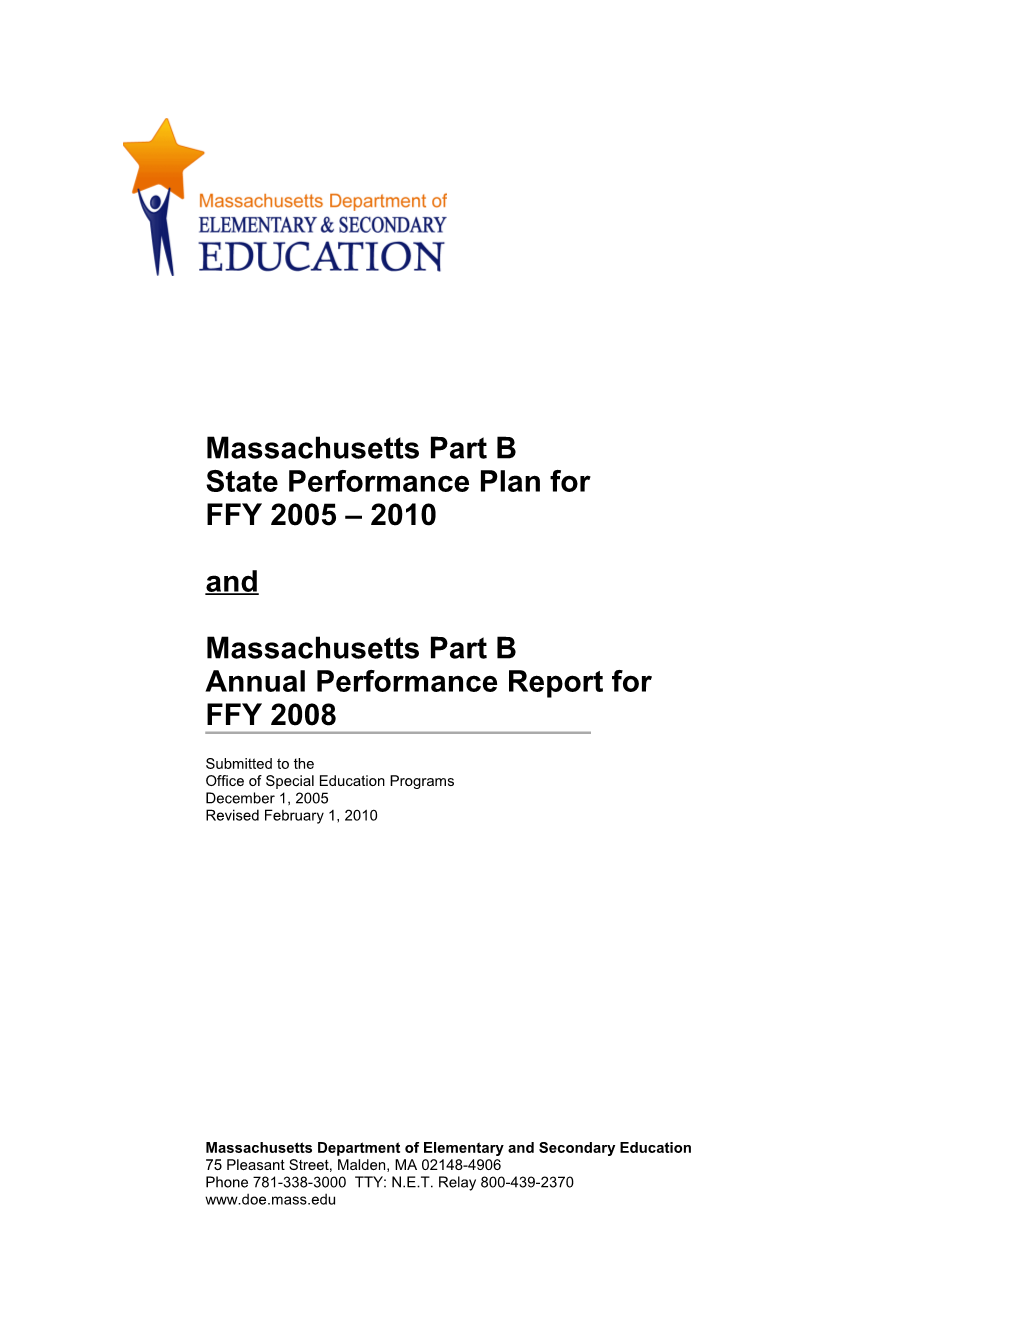 State Performance Plan and Annual Performance Report FFY 2008